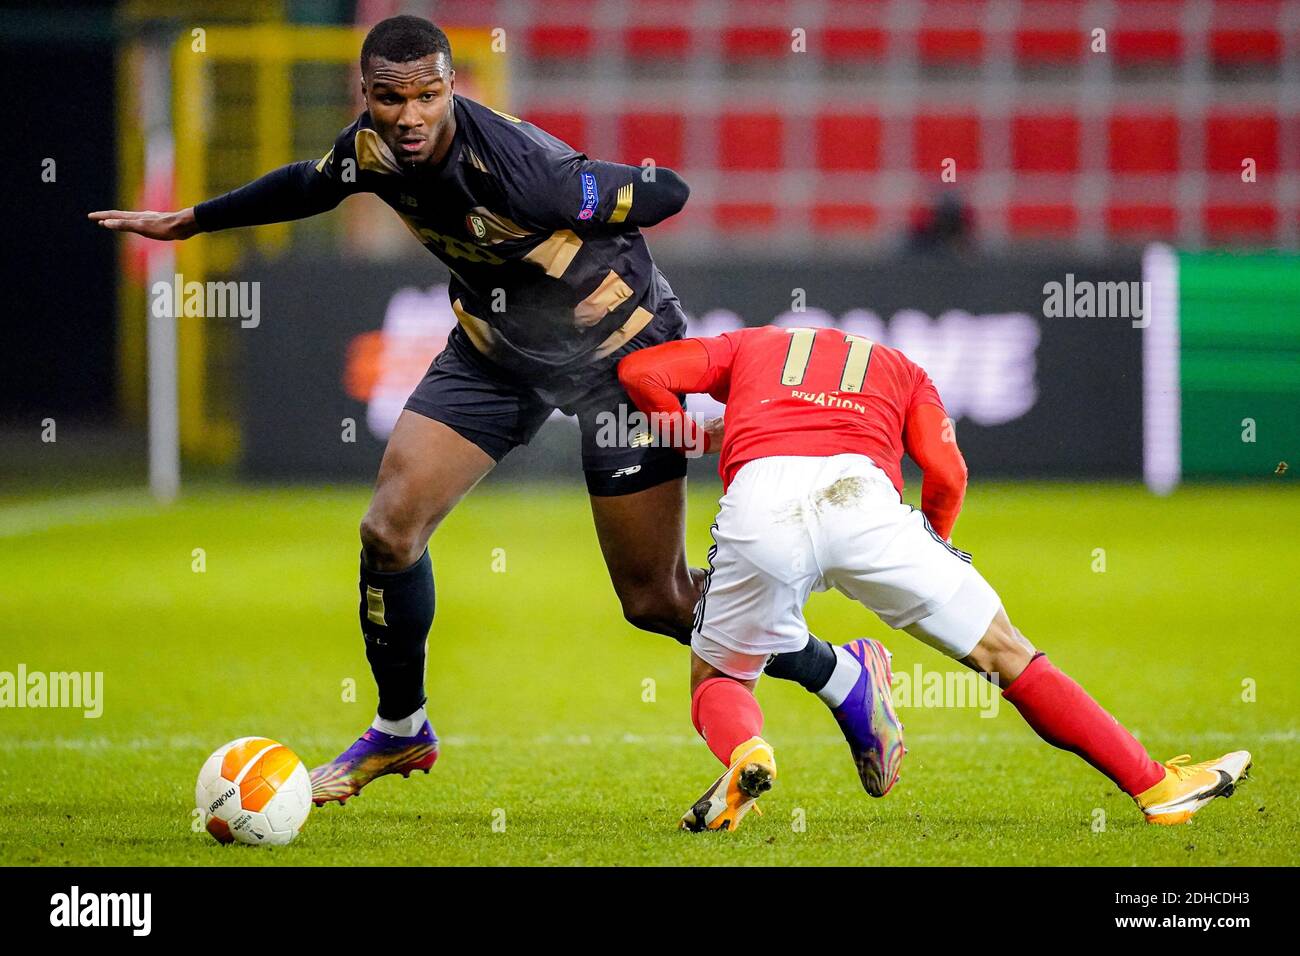 LIEGE, BELGIUM - DECEMBER 10: Obbi Oulare of Standard Liege, Franco Cervi of Benfica during the UEFA Europa League match between Standard Liege and Be Stock Photo